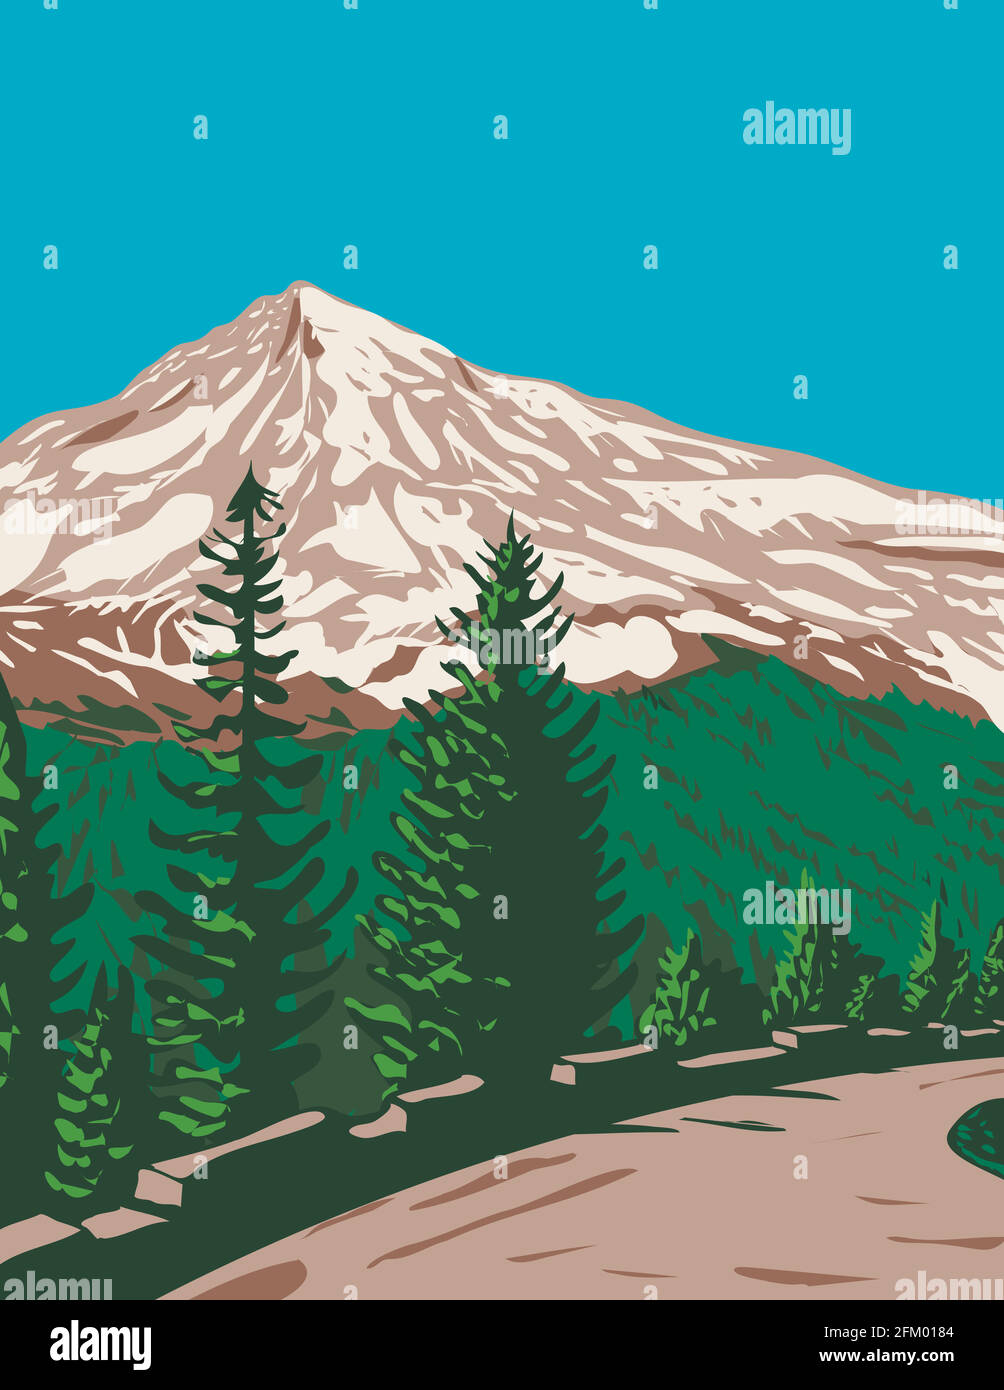 WPA Poster Art of South Face of Mount Rainier, Tahoma or Tacoma with Kautz Ice Cliff located in Mount Rainier National Park , Washington state Done in Illustrazione Vettoriale